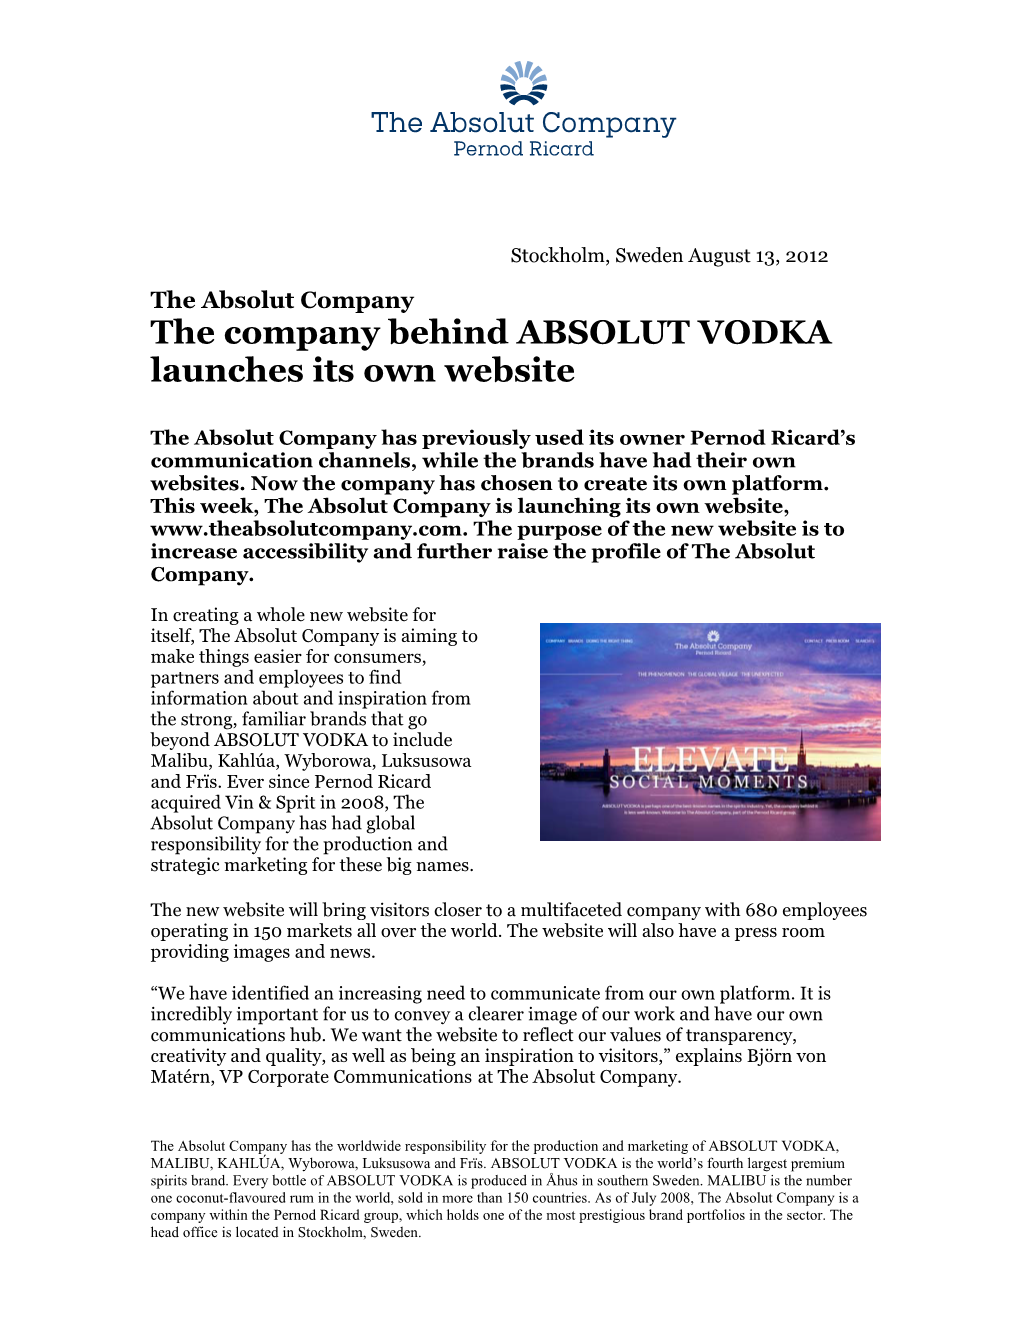 The Company Behind ABSOLUT VODKA Launches Its Own Website